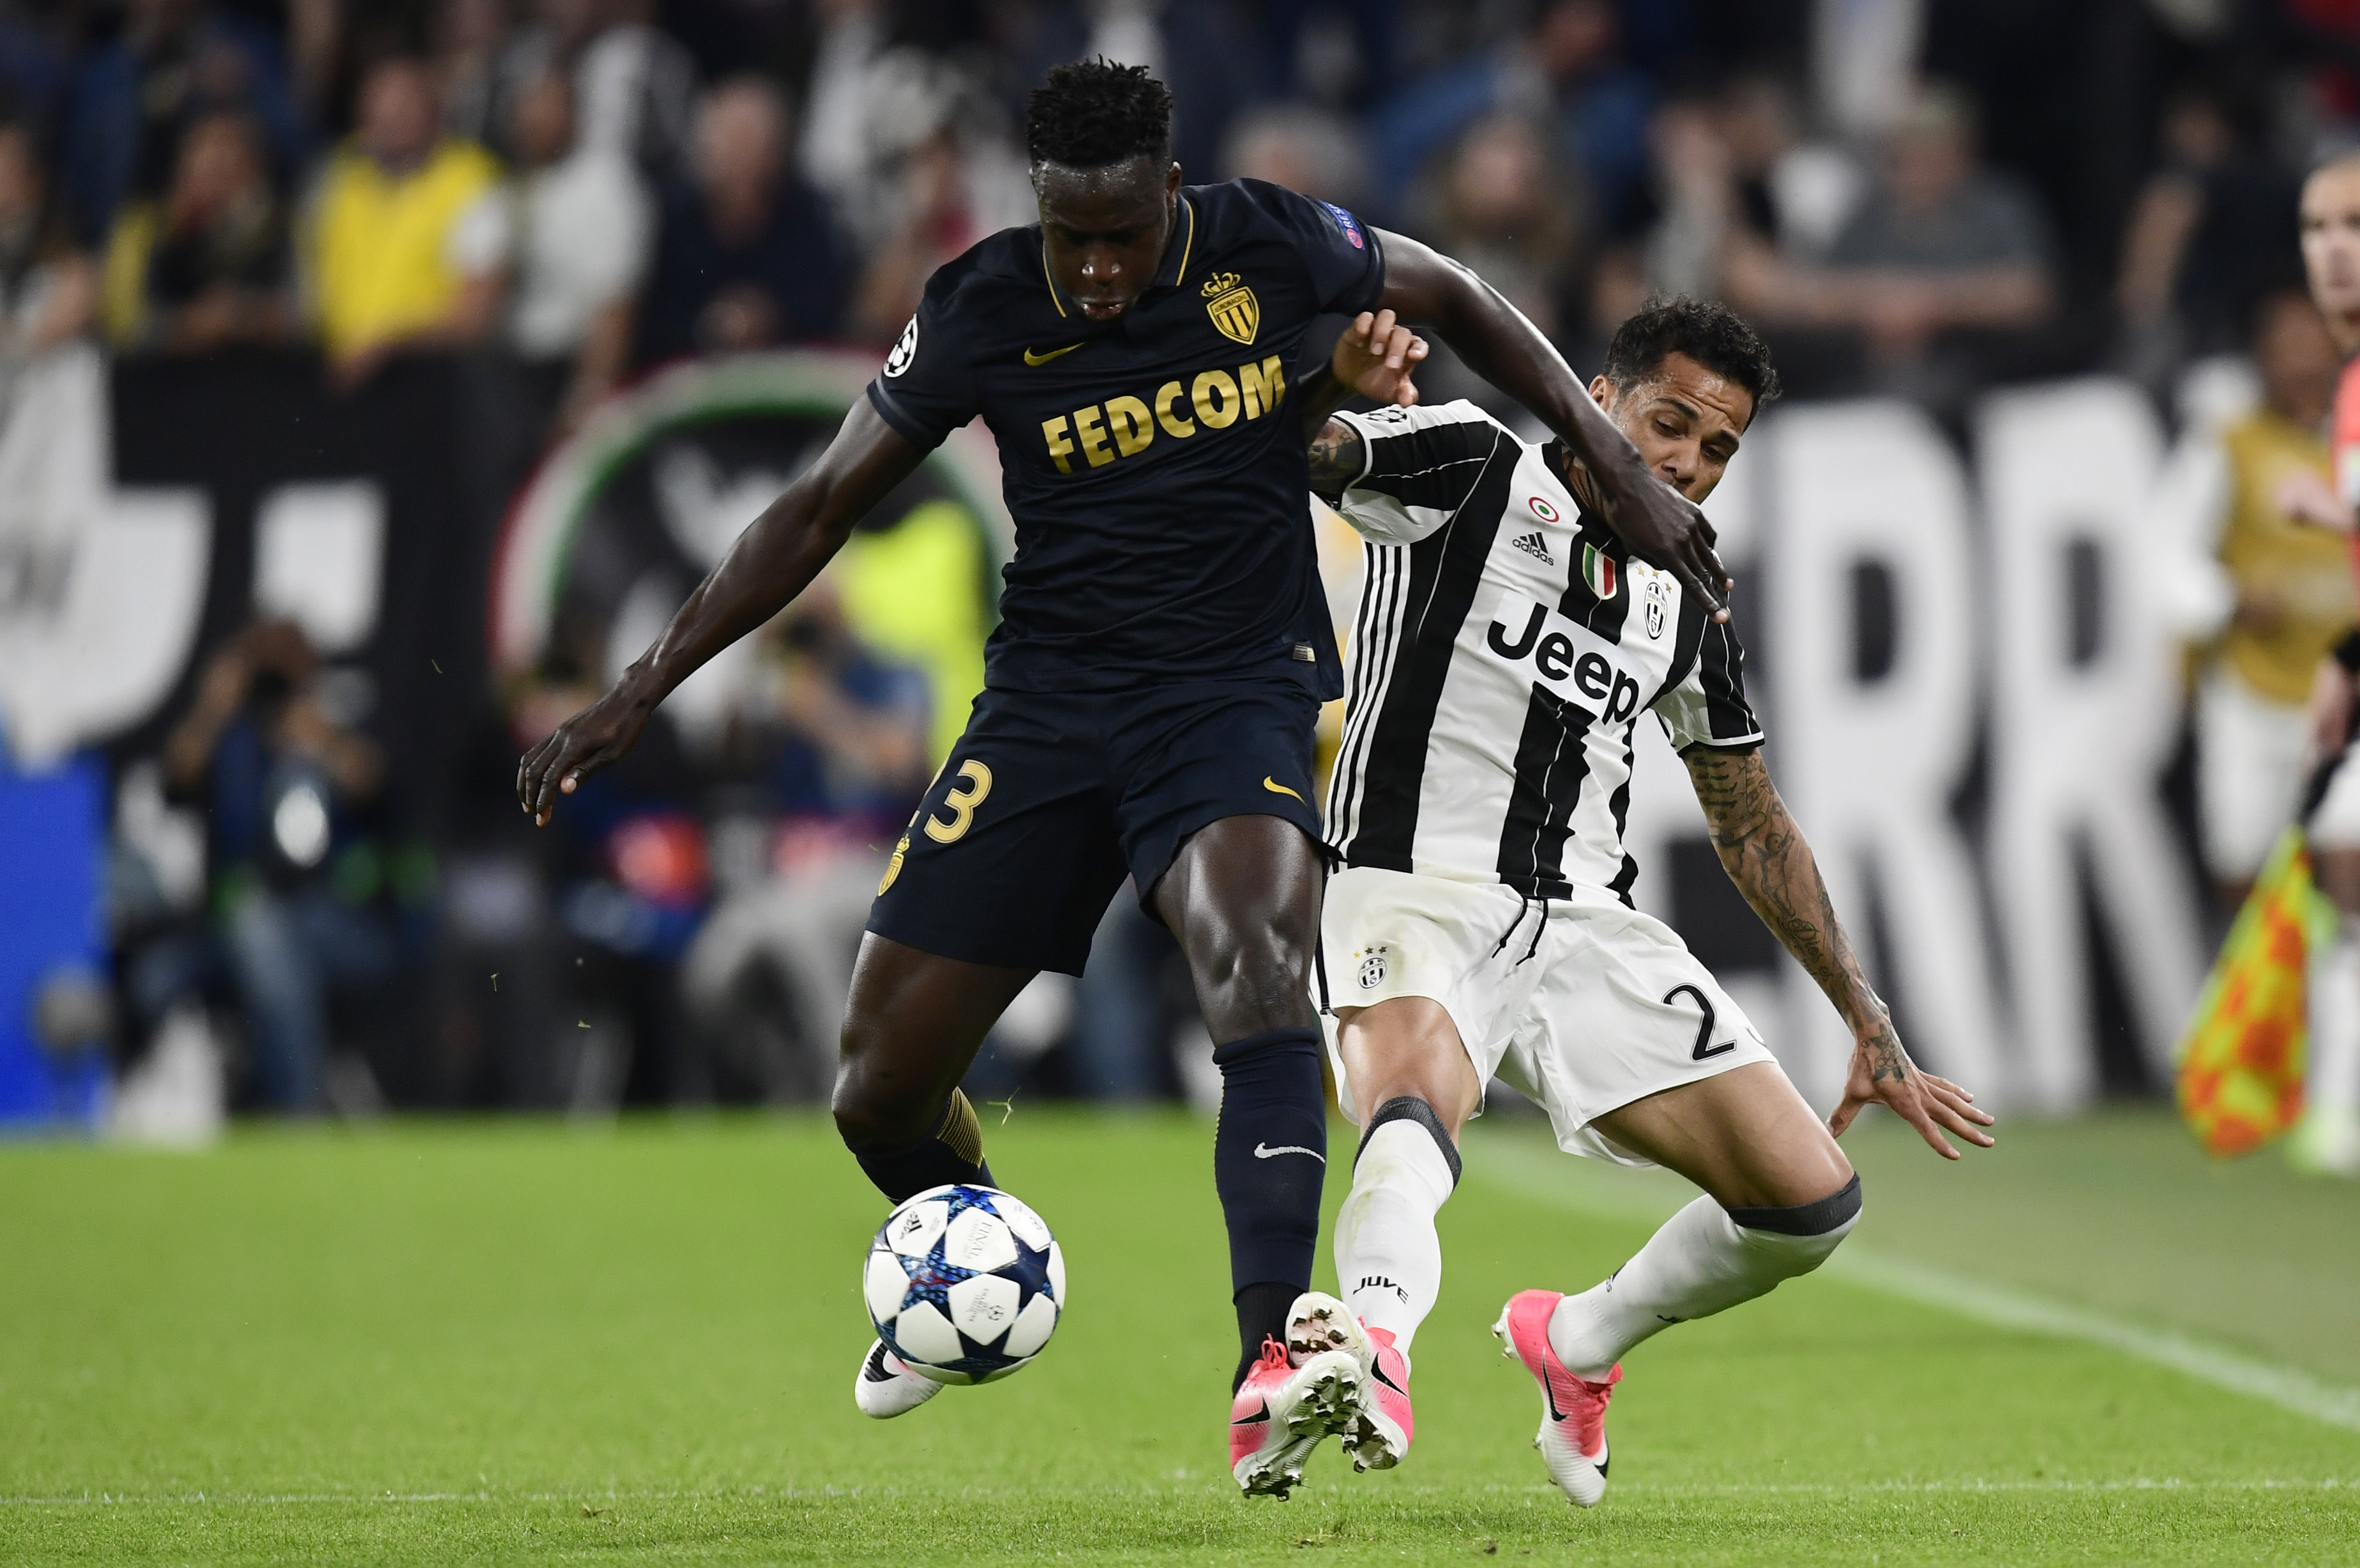 Monaco's French defender Benjamin Mendy (L) vies with Juventus Defender from Brazil Dani Alves during the UEFA Champions League semi final second leg football match Juventus vs Monaco, on May 9, 2017 at the Juventus stadium in Turin.  / AFP PHOTO / Miguel MEDINA        (Photo credit should read MIGUEL MEDINA/AFP/Getty Images)